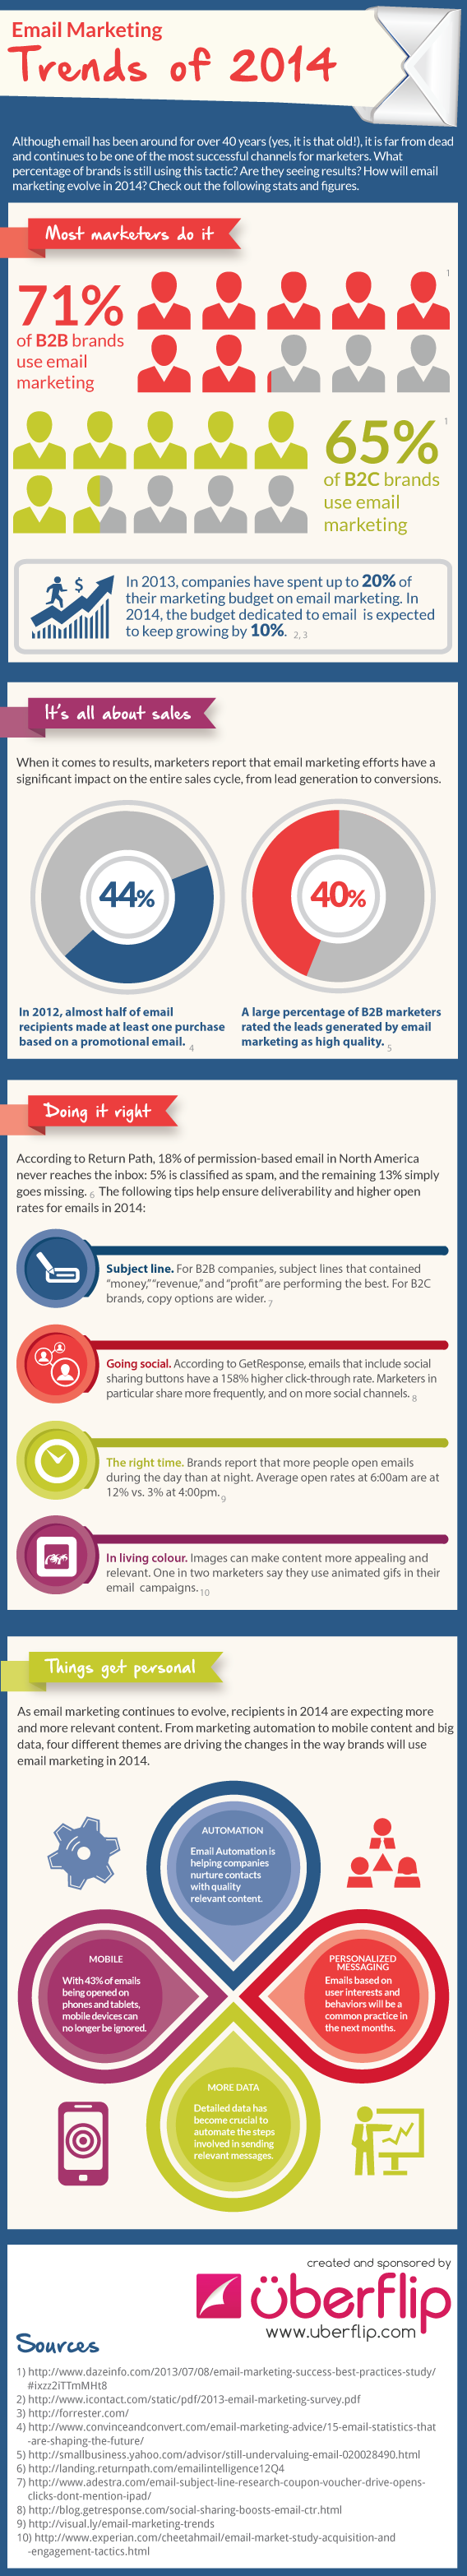 Email Marketing Trends 2014